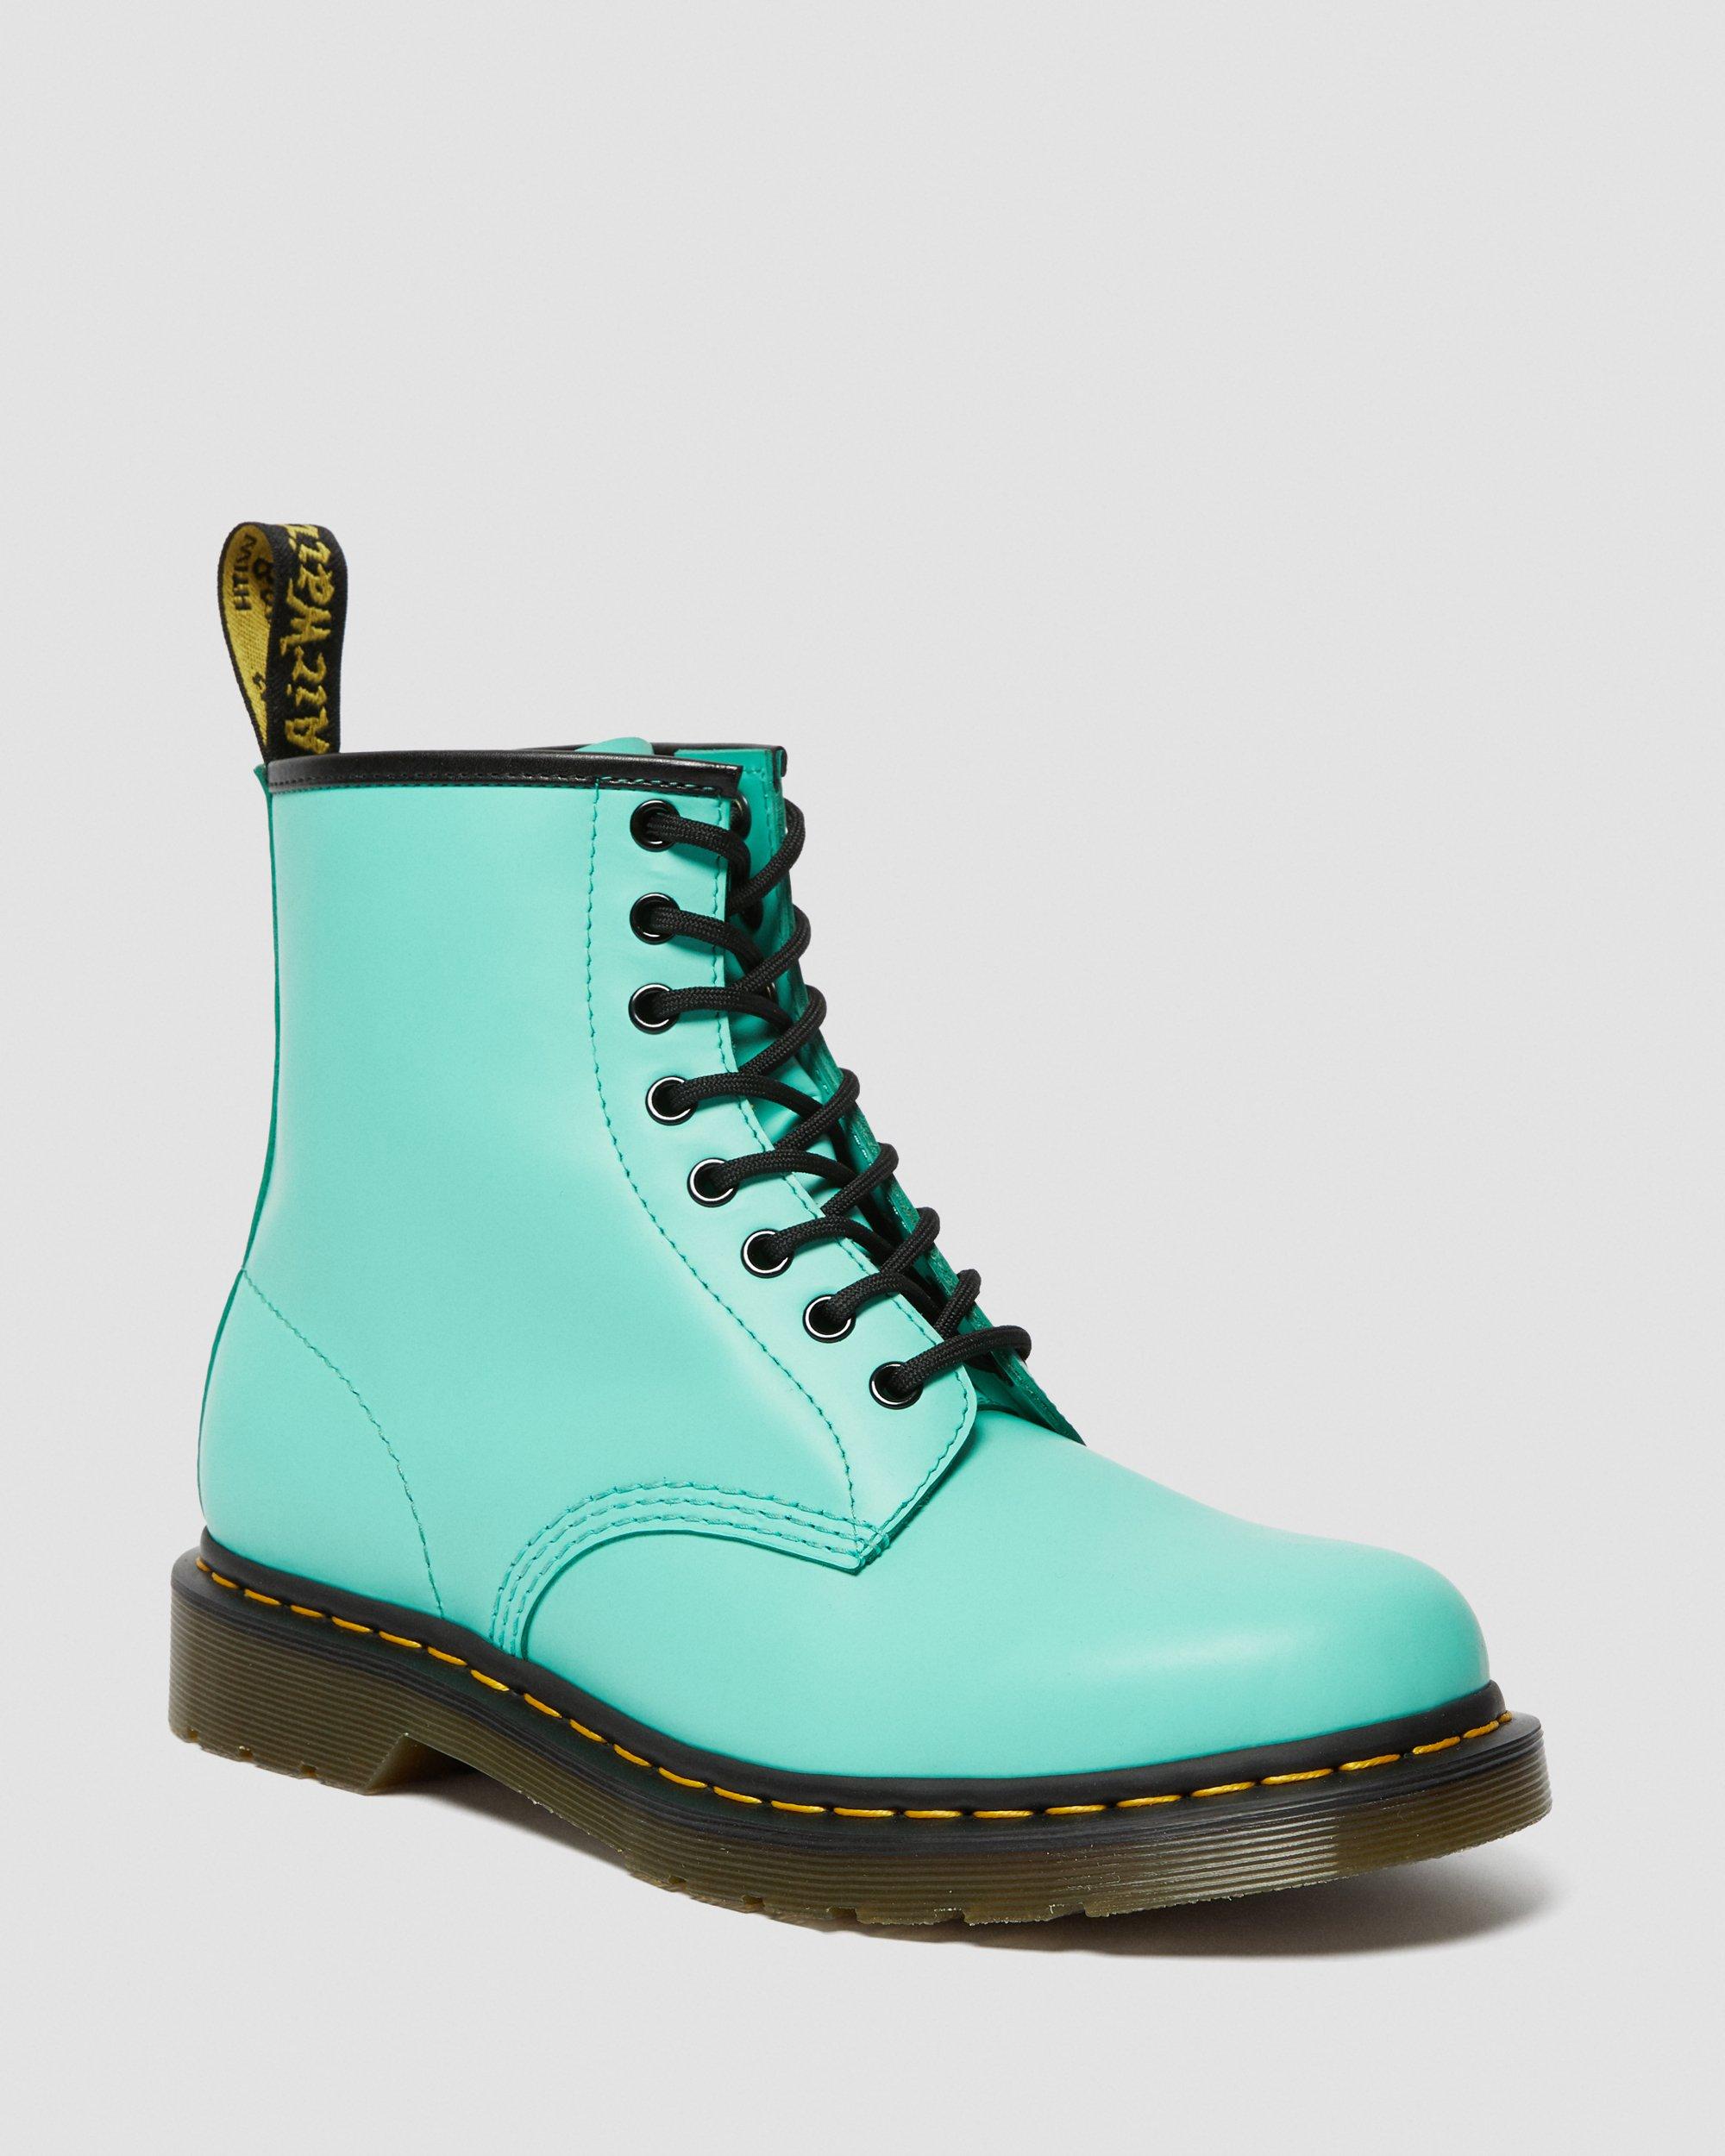 youth size 5 dr martens